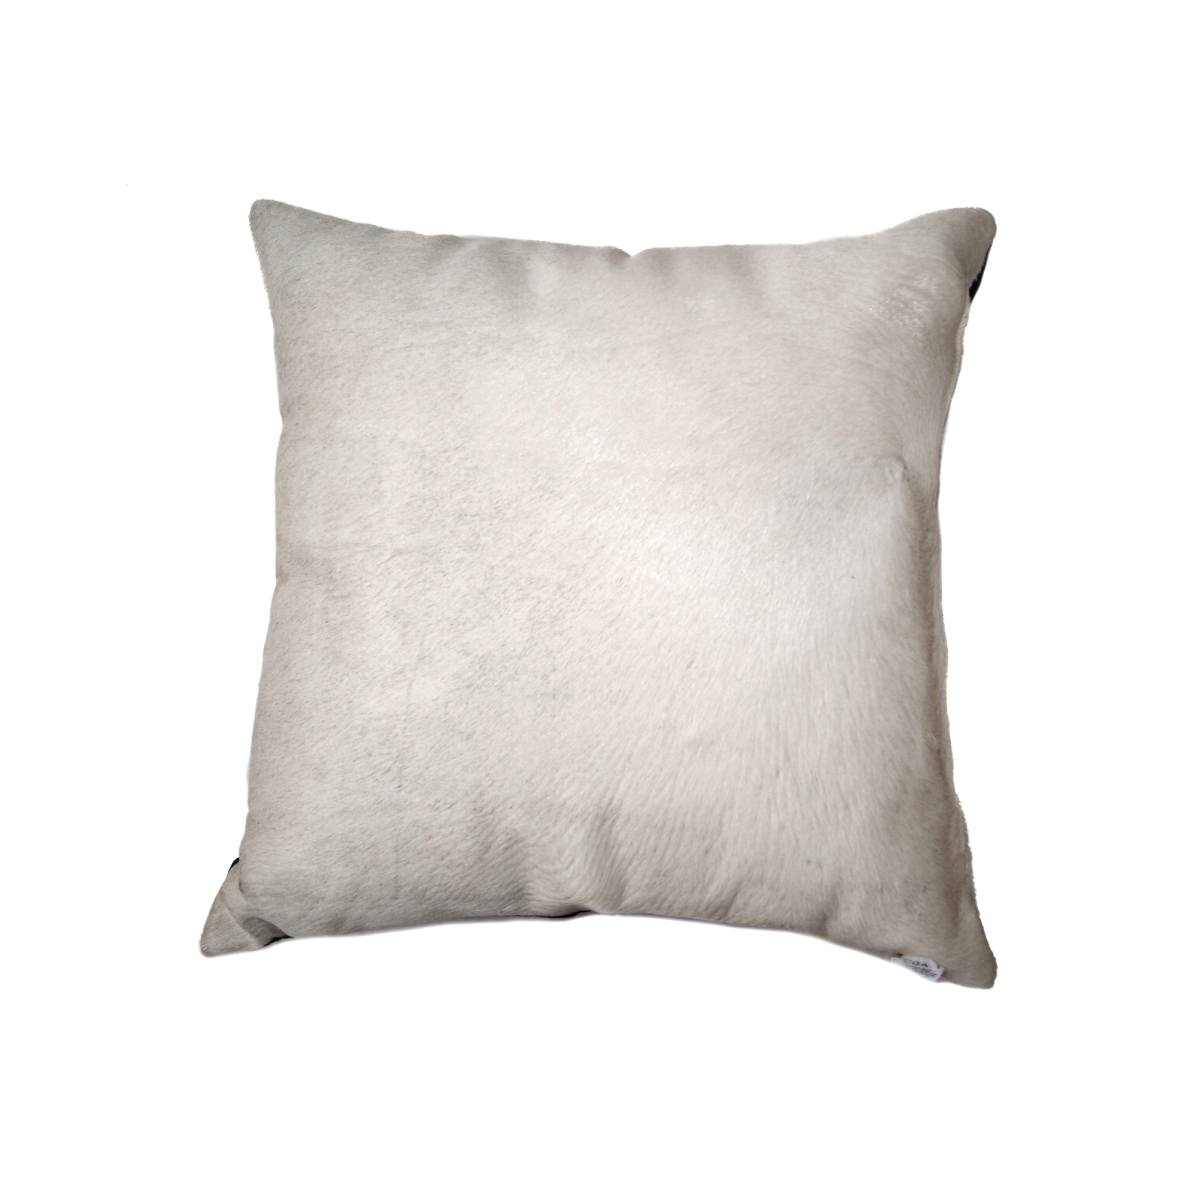 676685000286 18 X 18 In. Torino Cowhide Pillow - Off White